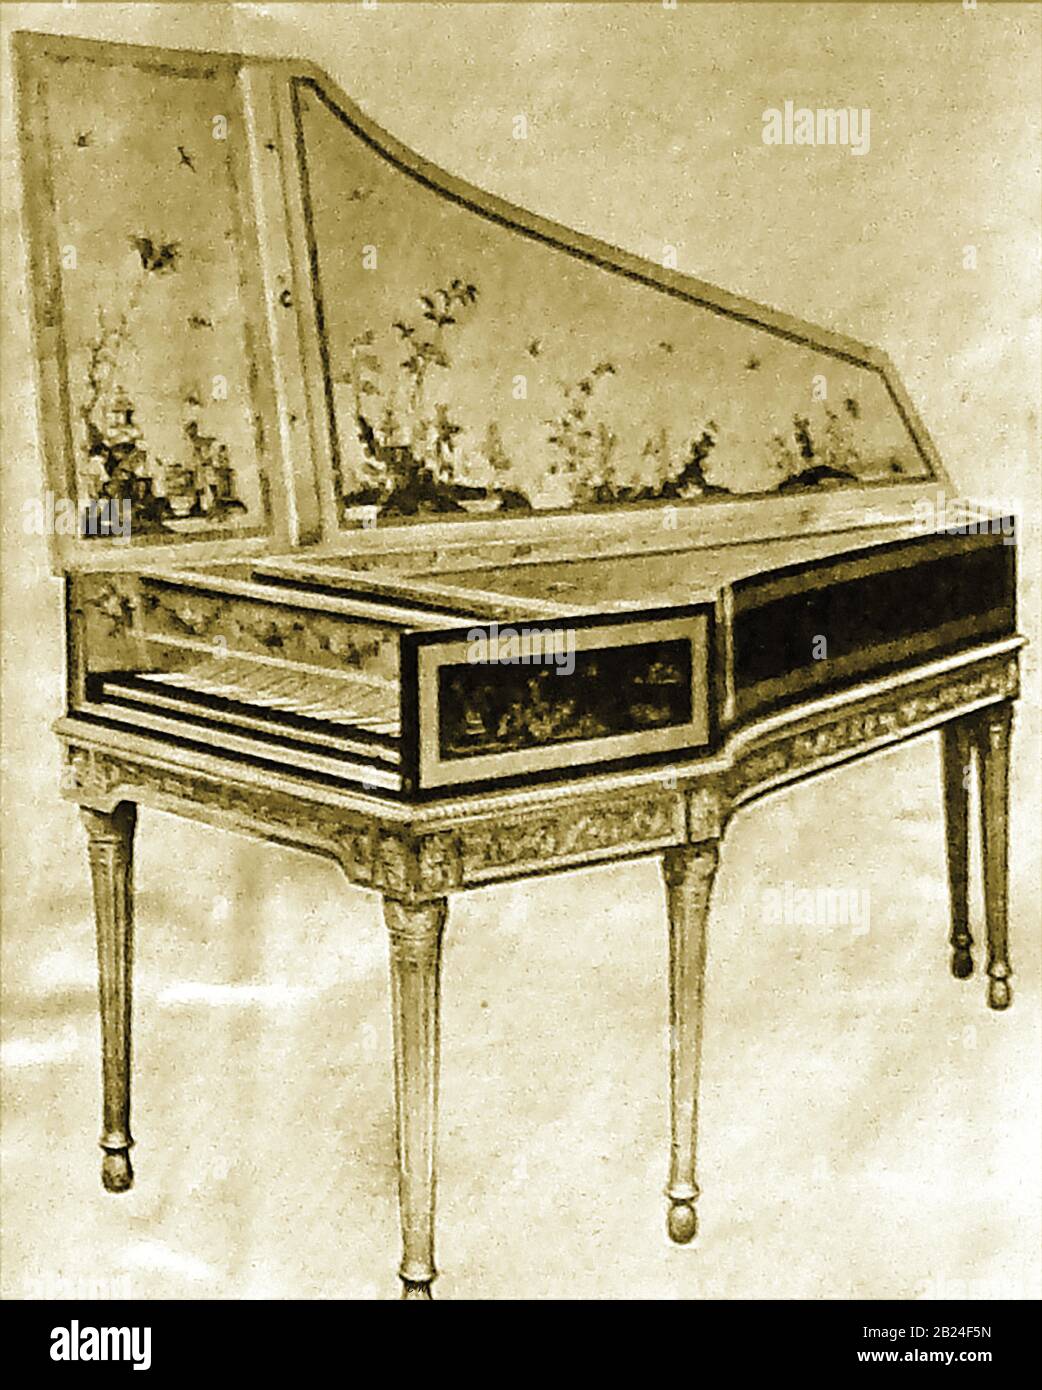 An 18th century harpsichord made in  the 18th century by Pascal Taskin (Pascal-Joseph Taskin ( 1723 – 1793 ), a Belgium-born French harpsichord and piano maker. He was as a master instrument-maker, taking over the supervision of the Blanchet workshop and became  facteur des clavessins du Roi (Keeper of the King's Music) Stock Photo